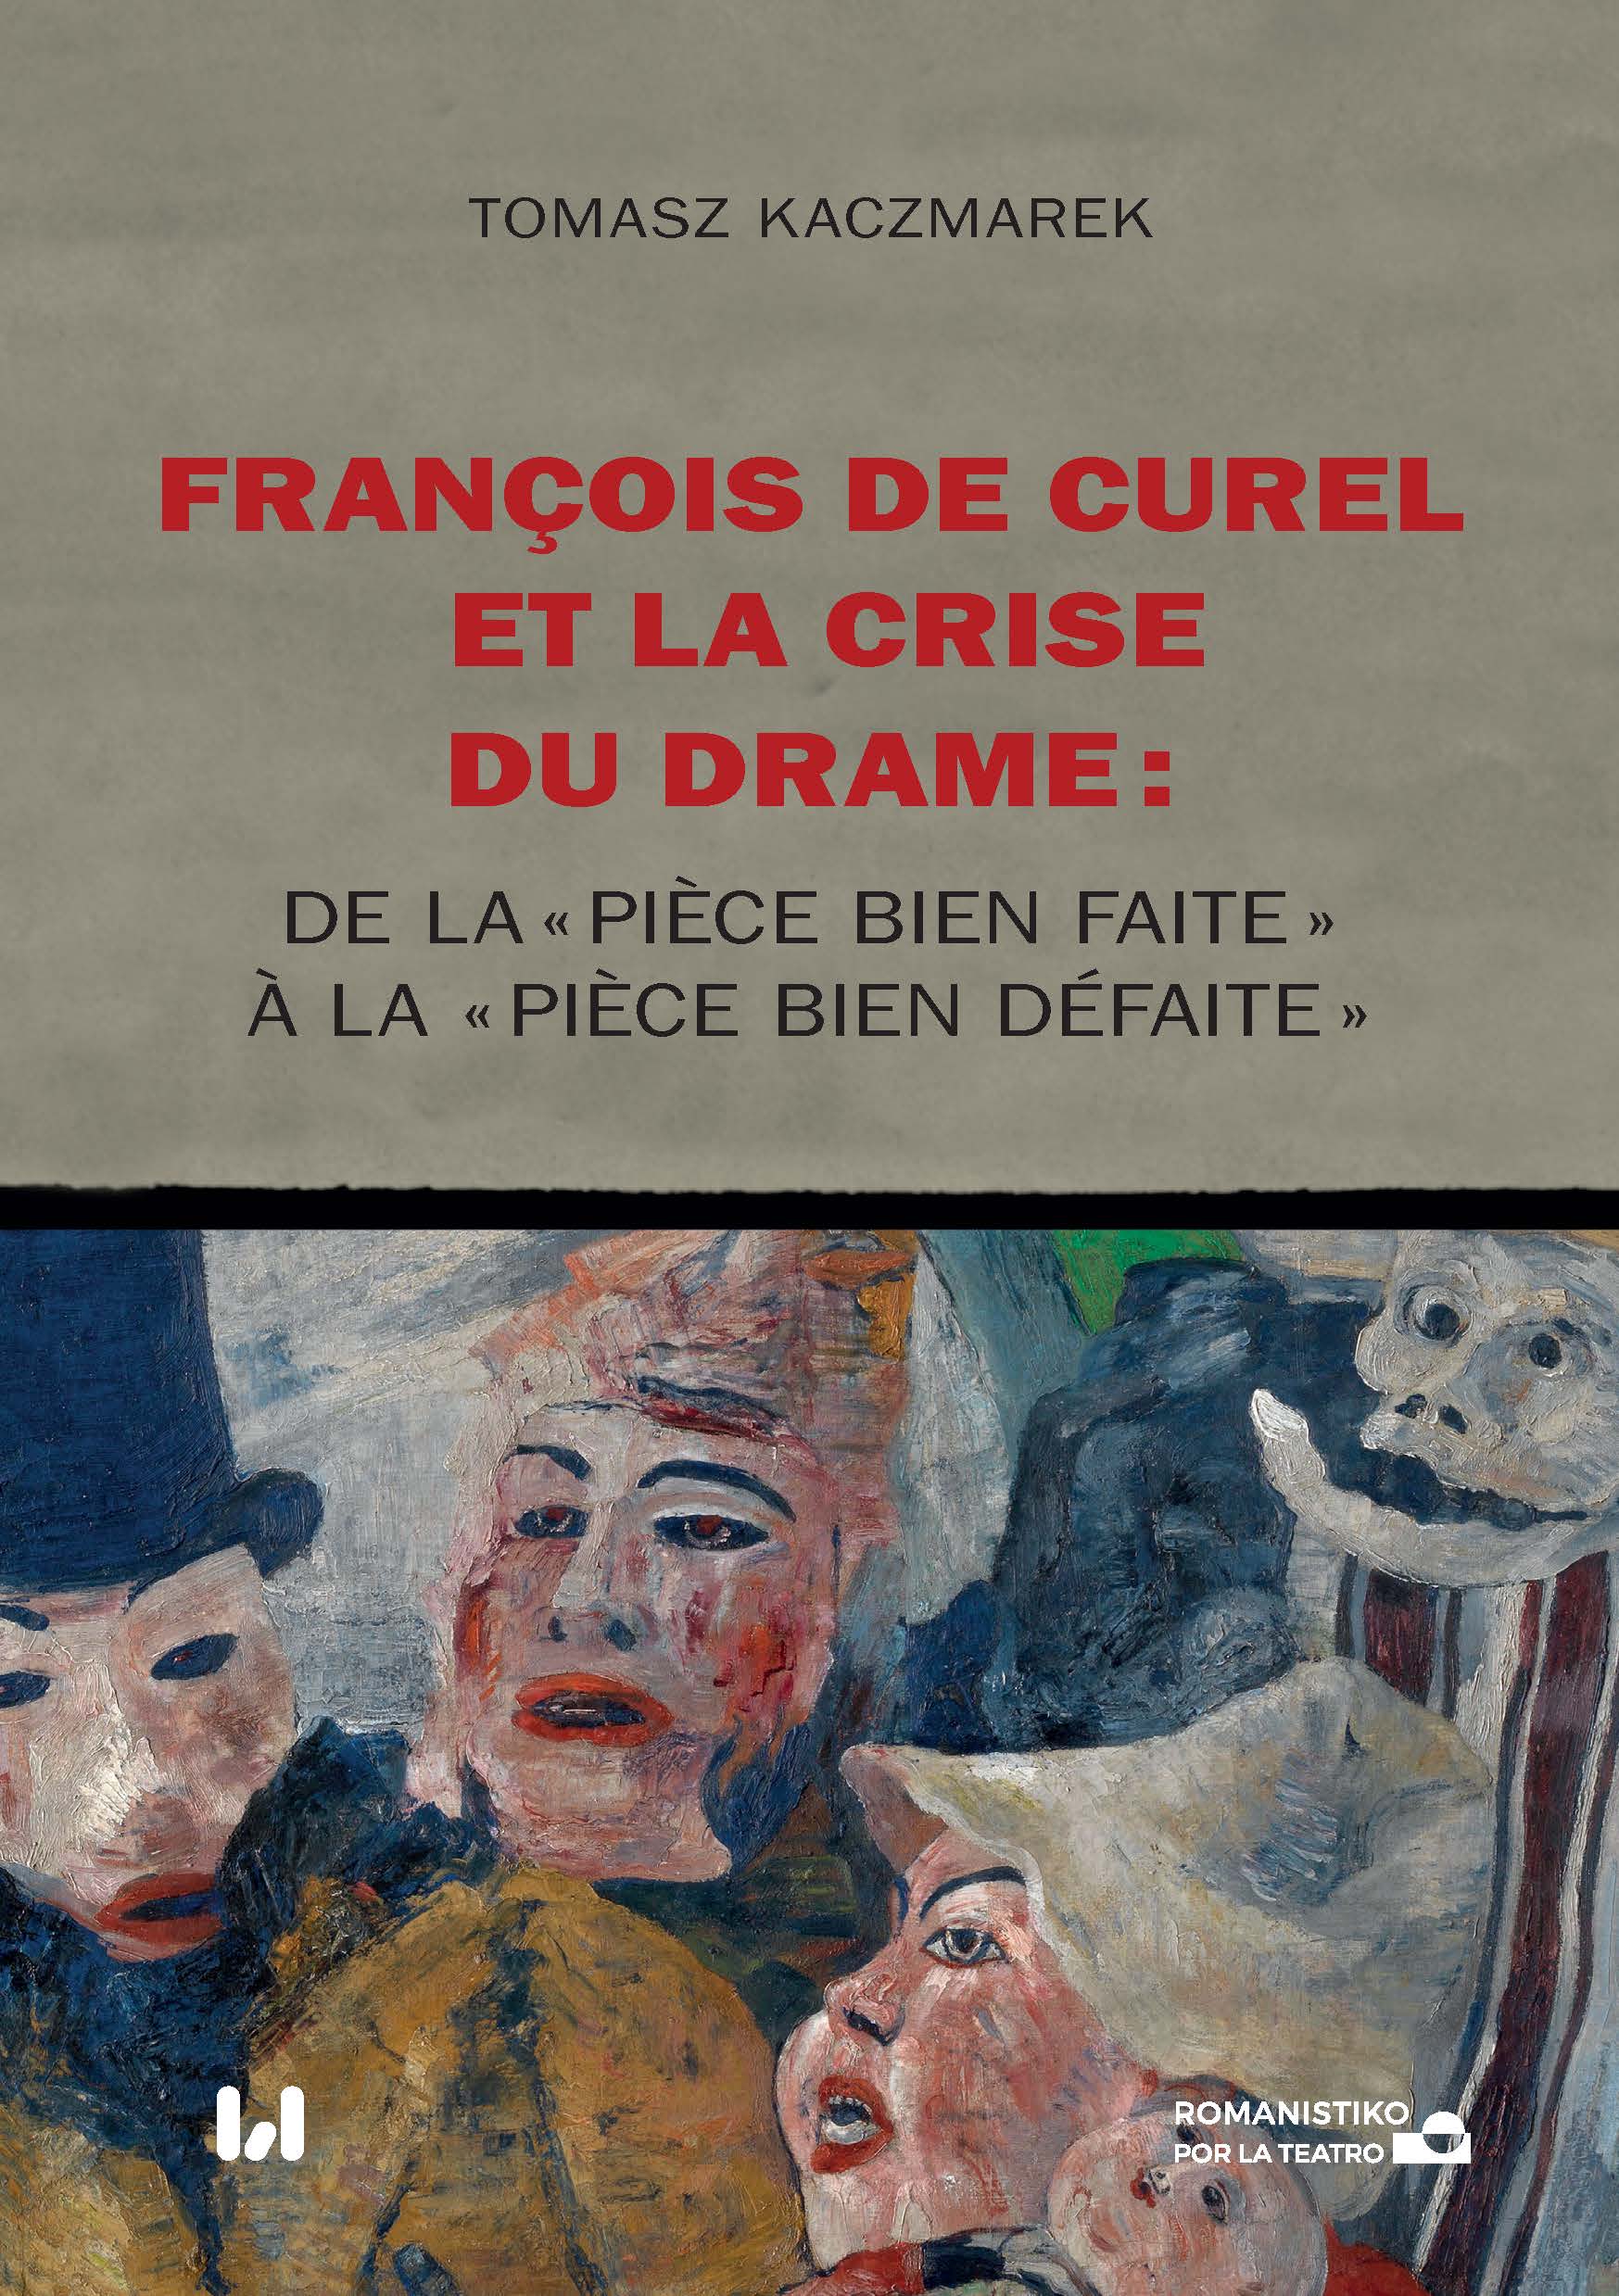 François de Curel and the crisis of drama: from the “well-made play” to the “well-unmade play”